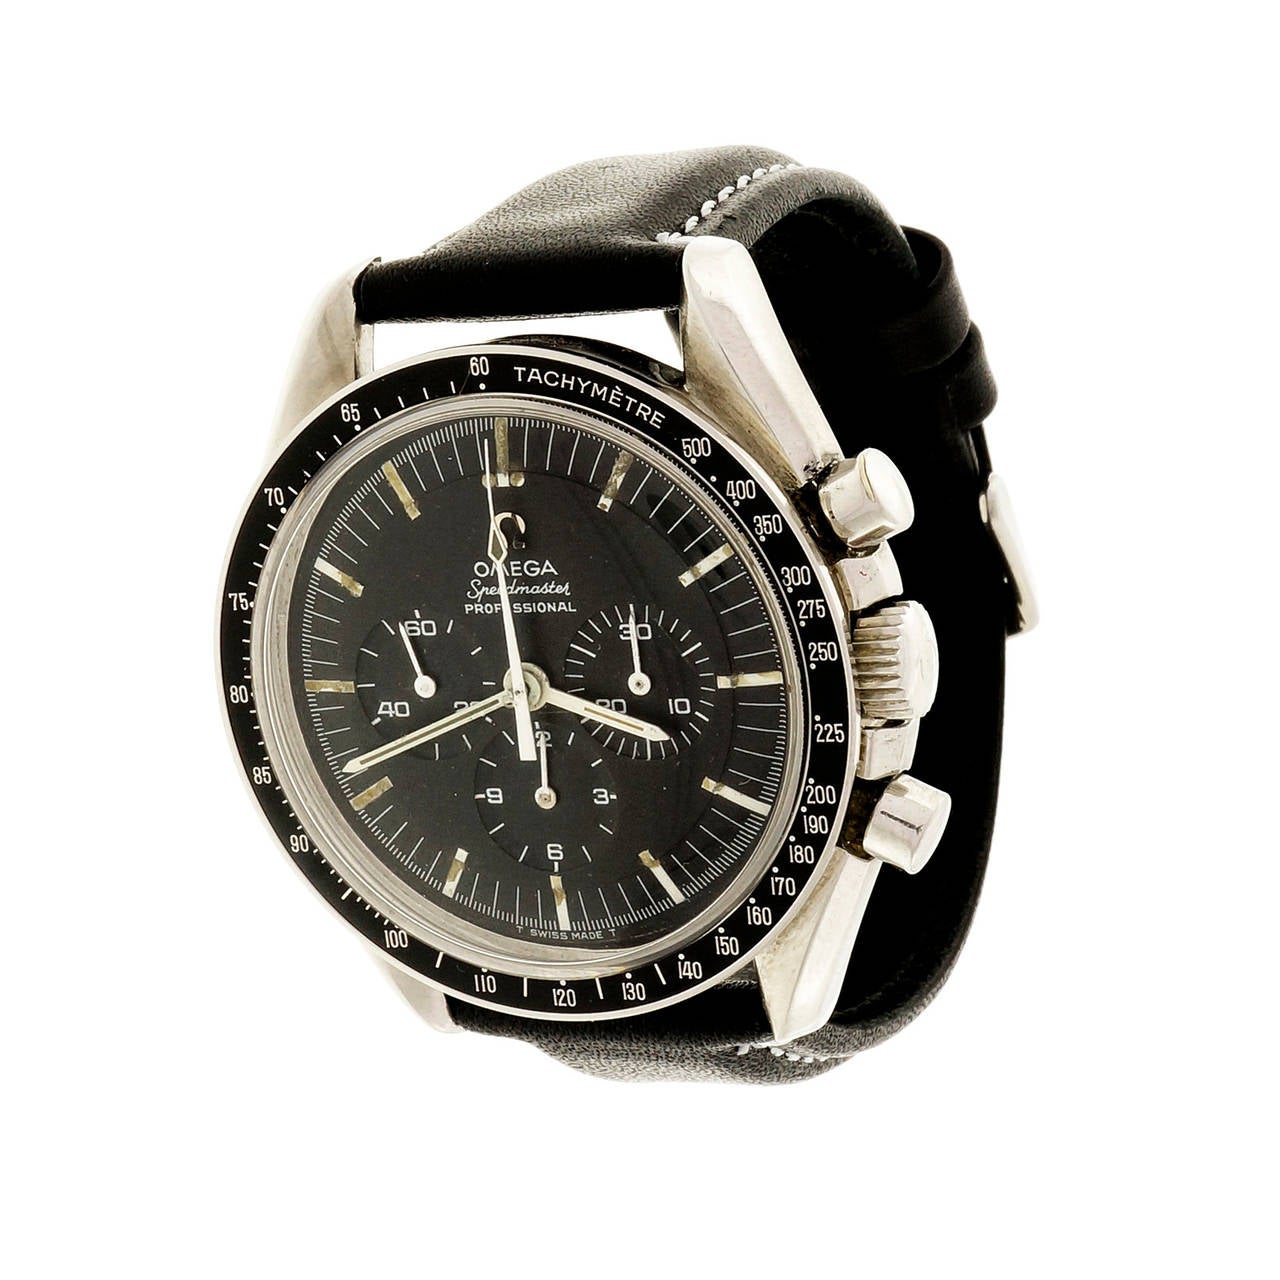 Omega Stainless Steel Speedmaster Chronograph Cal 861 Wristwatch 1